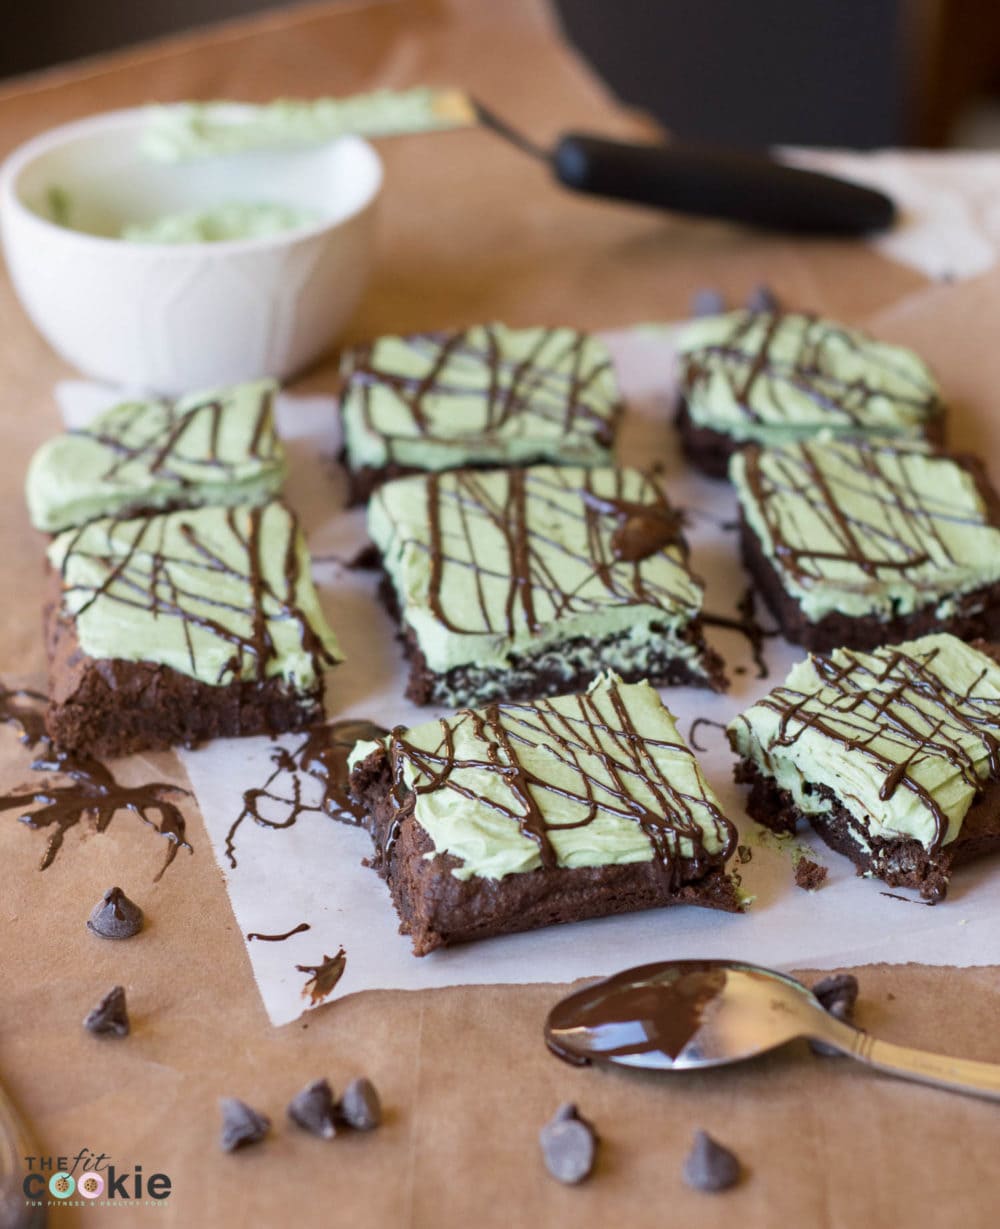 Gluten Free Frosted Mint Brownies (Vegan): Dense and chewy gluten-free mint brownies covered with naturally colored mint frosting - these are AMAZING!! - @TheFitCookie